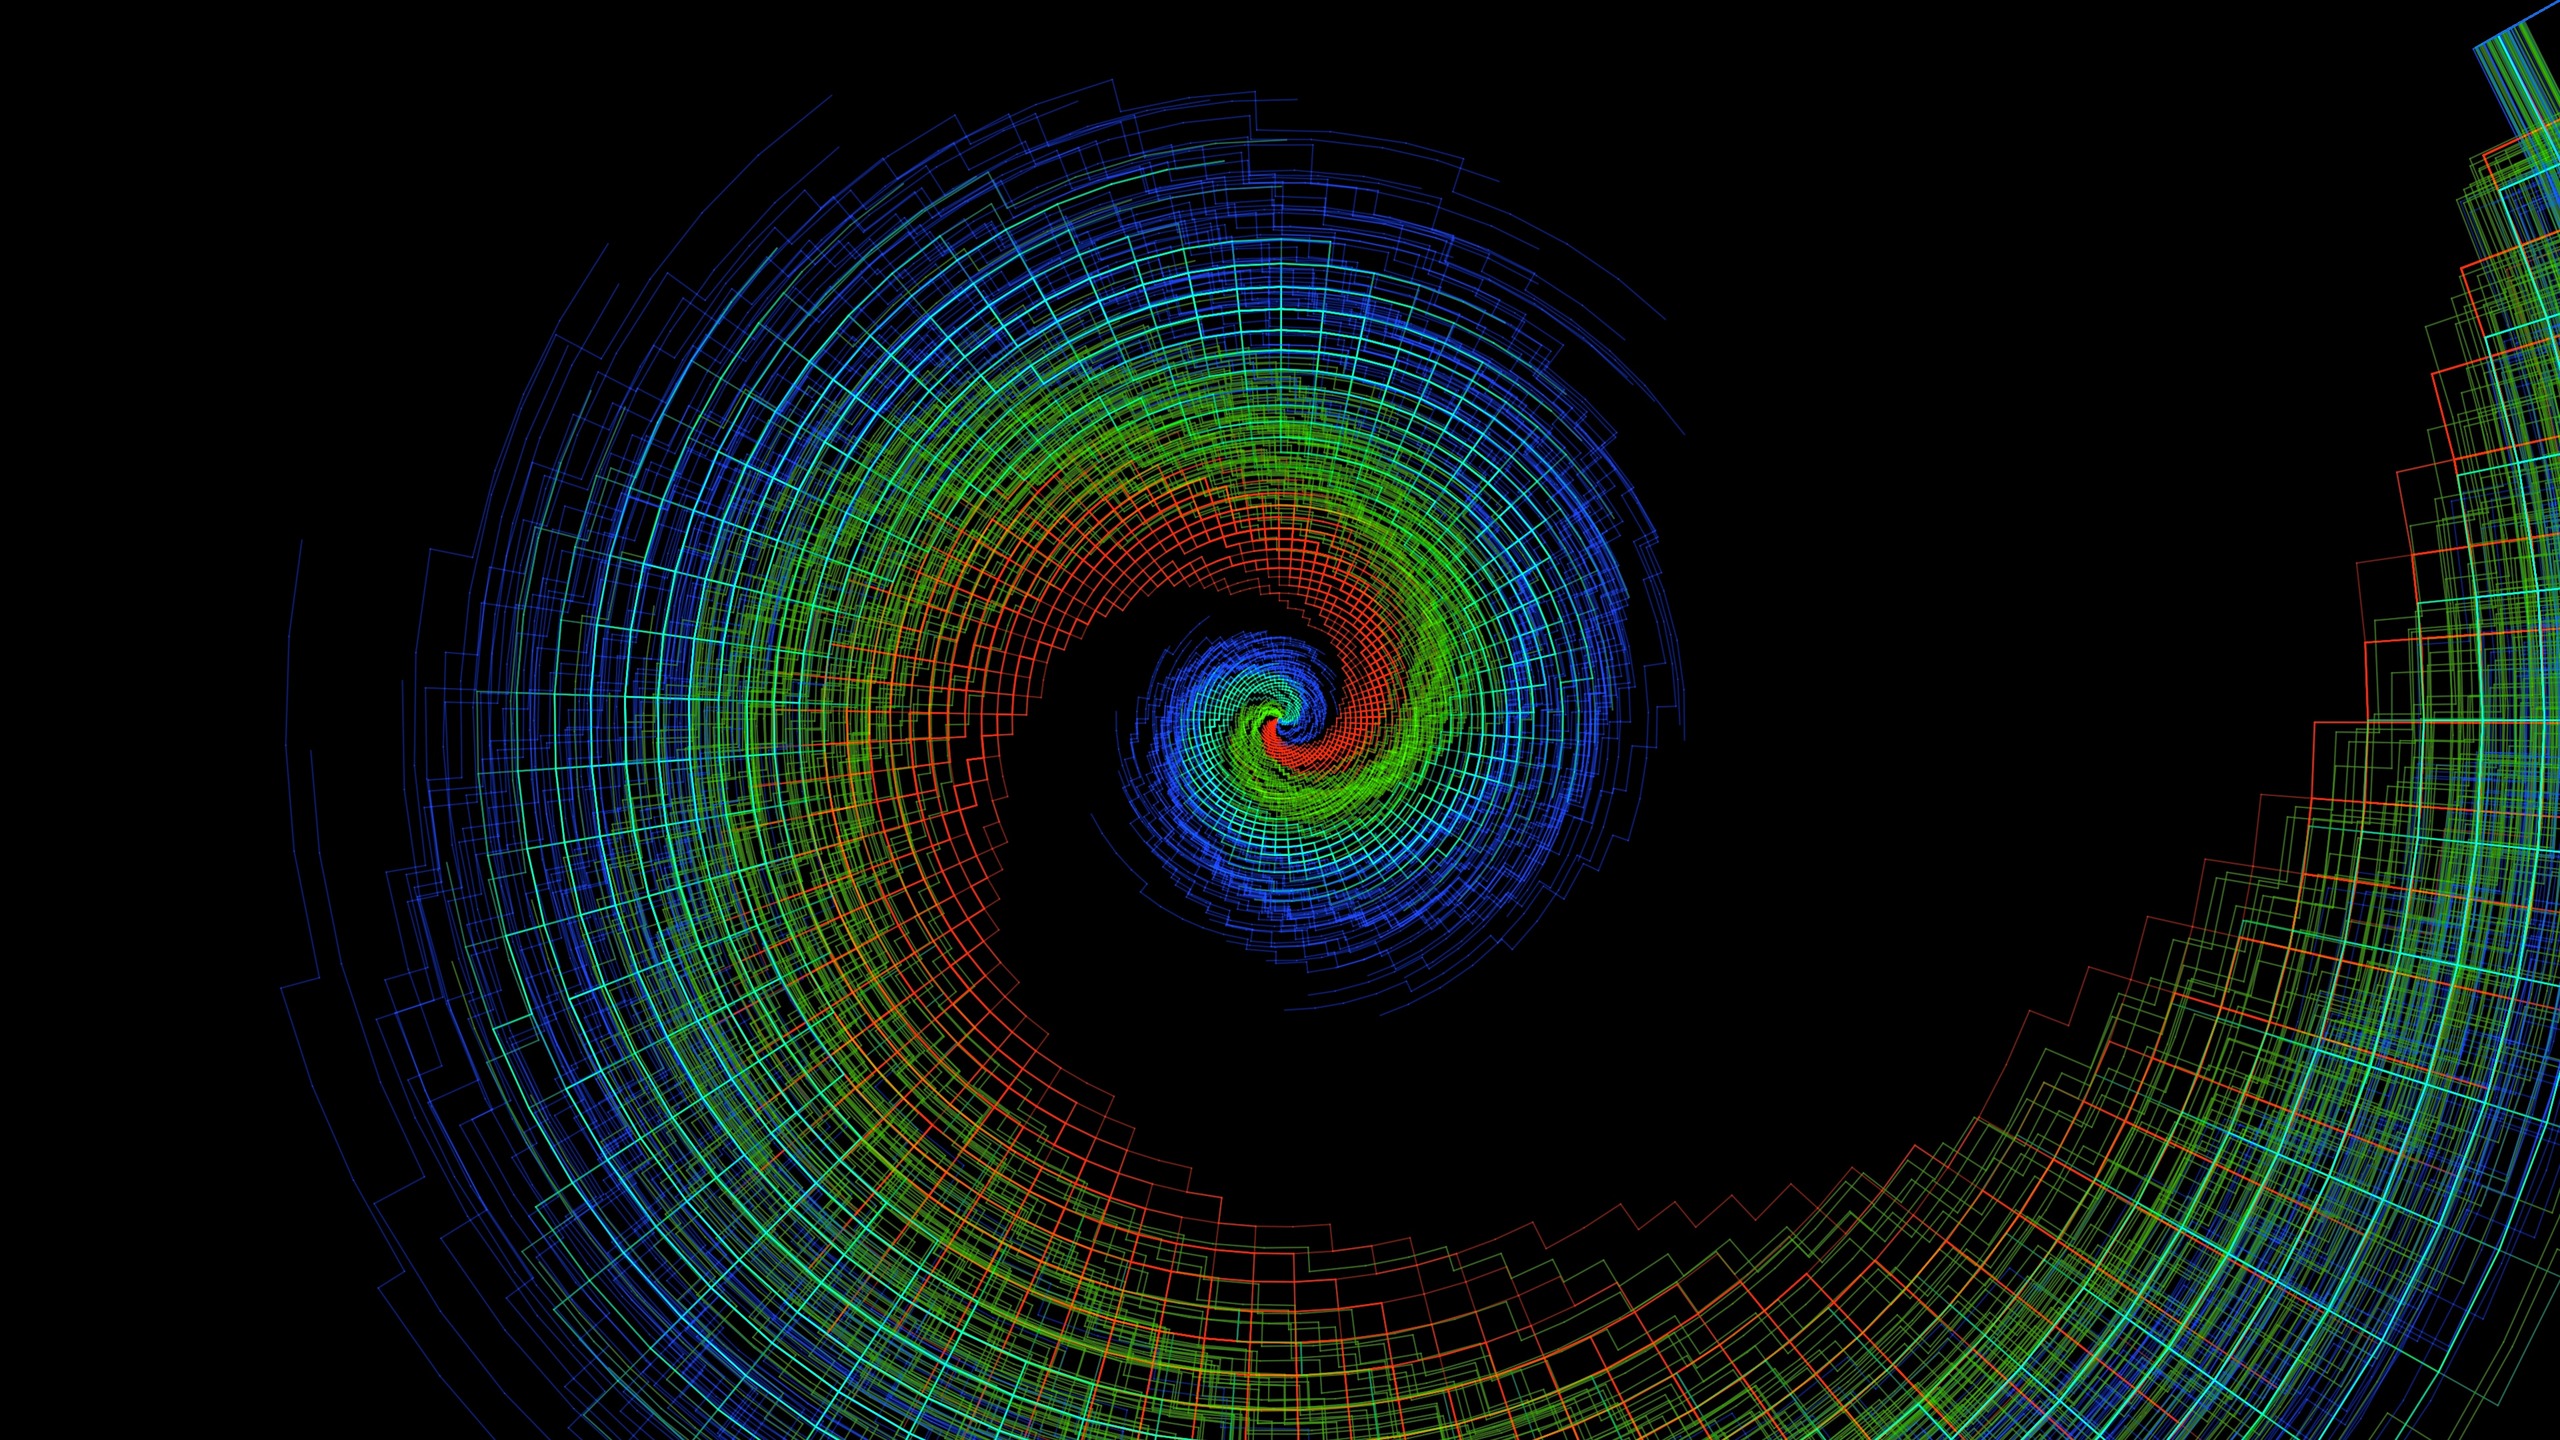 Download wallpaper 2560x1440 spiral, colorful, funnel, twisted